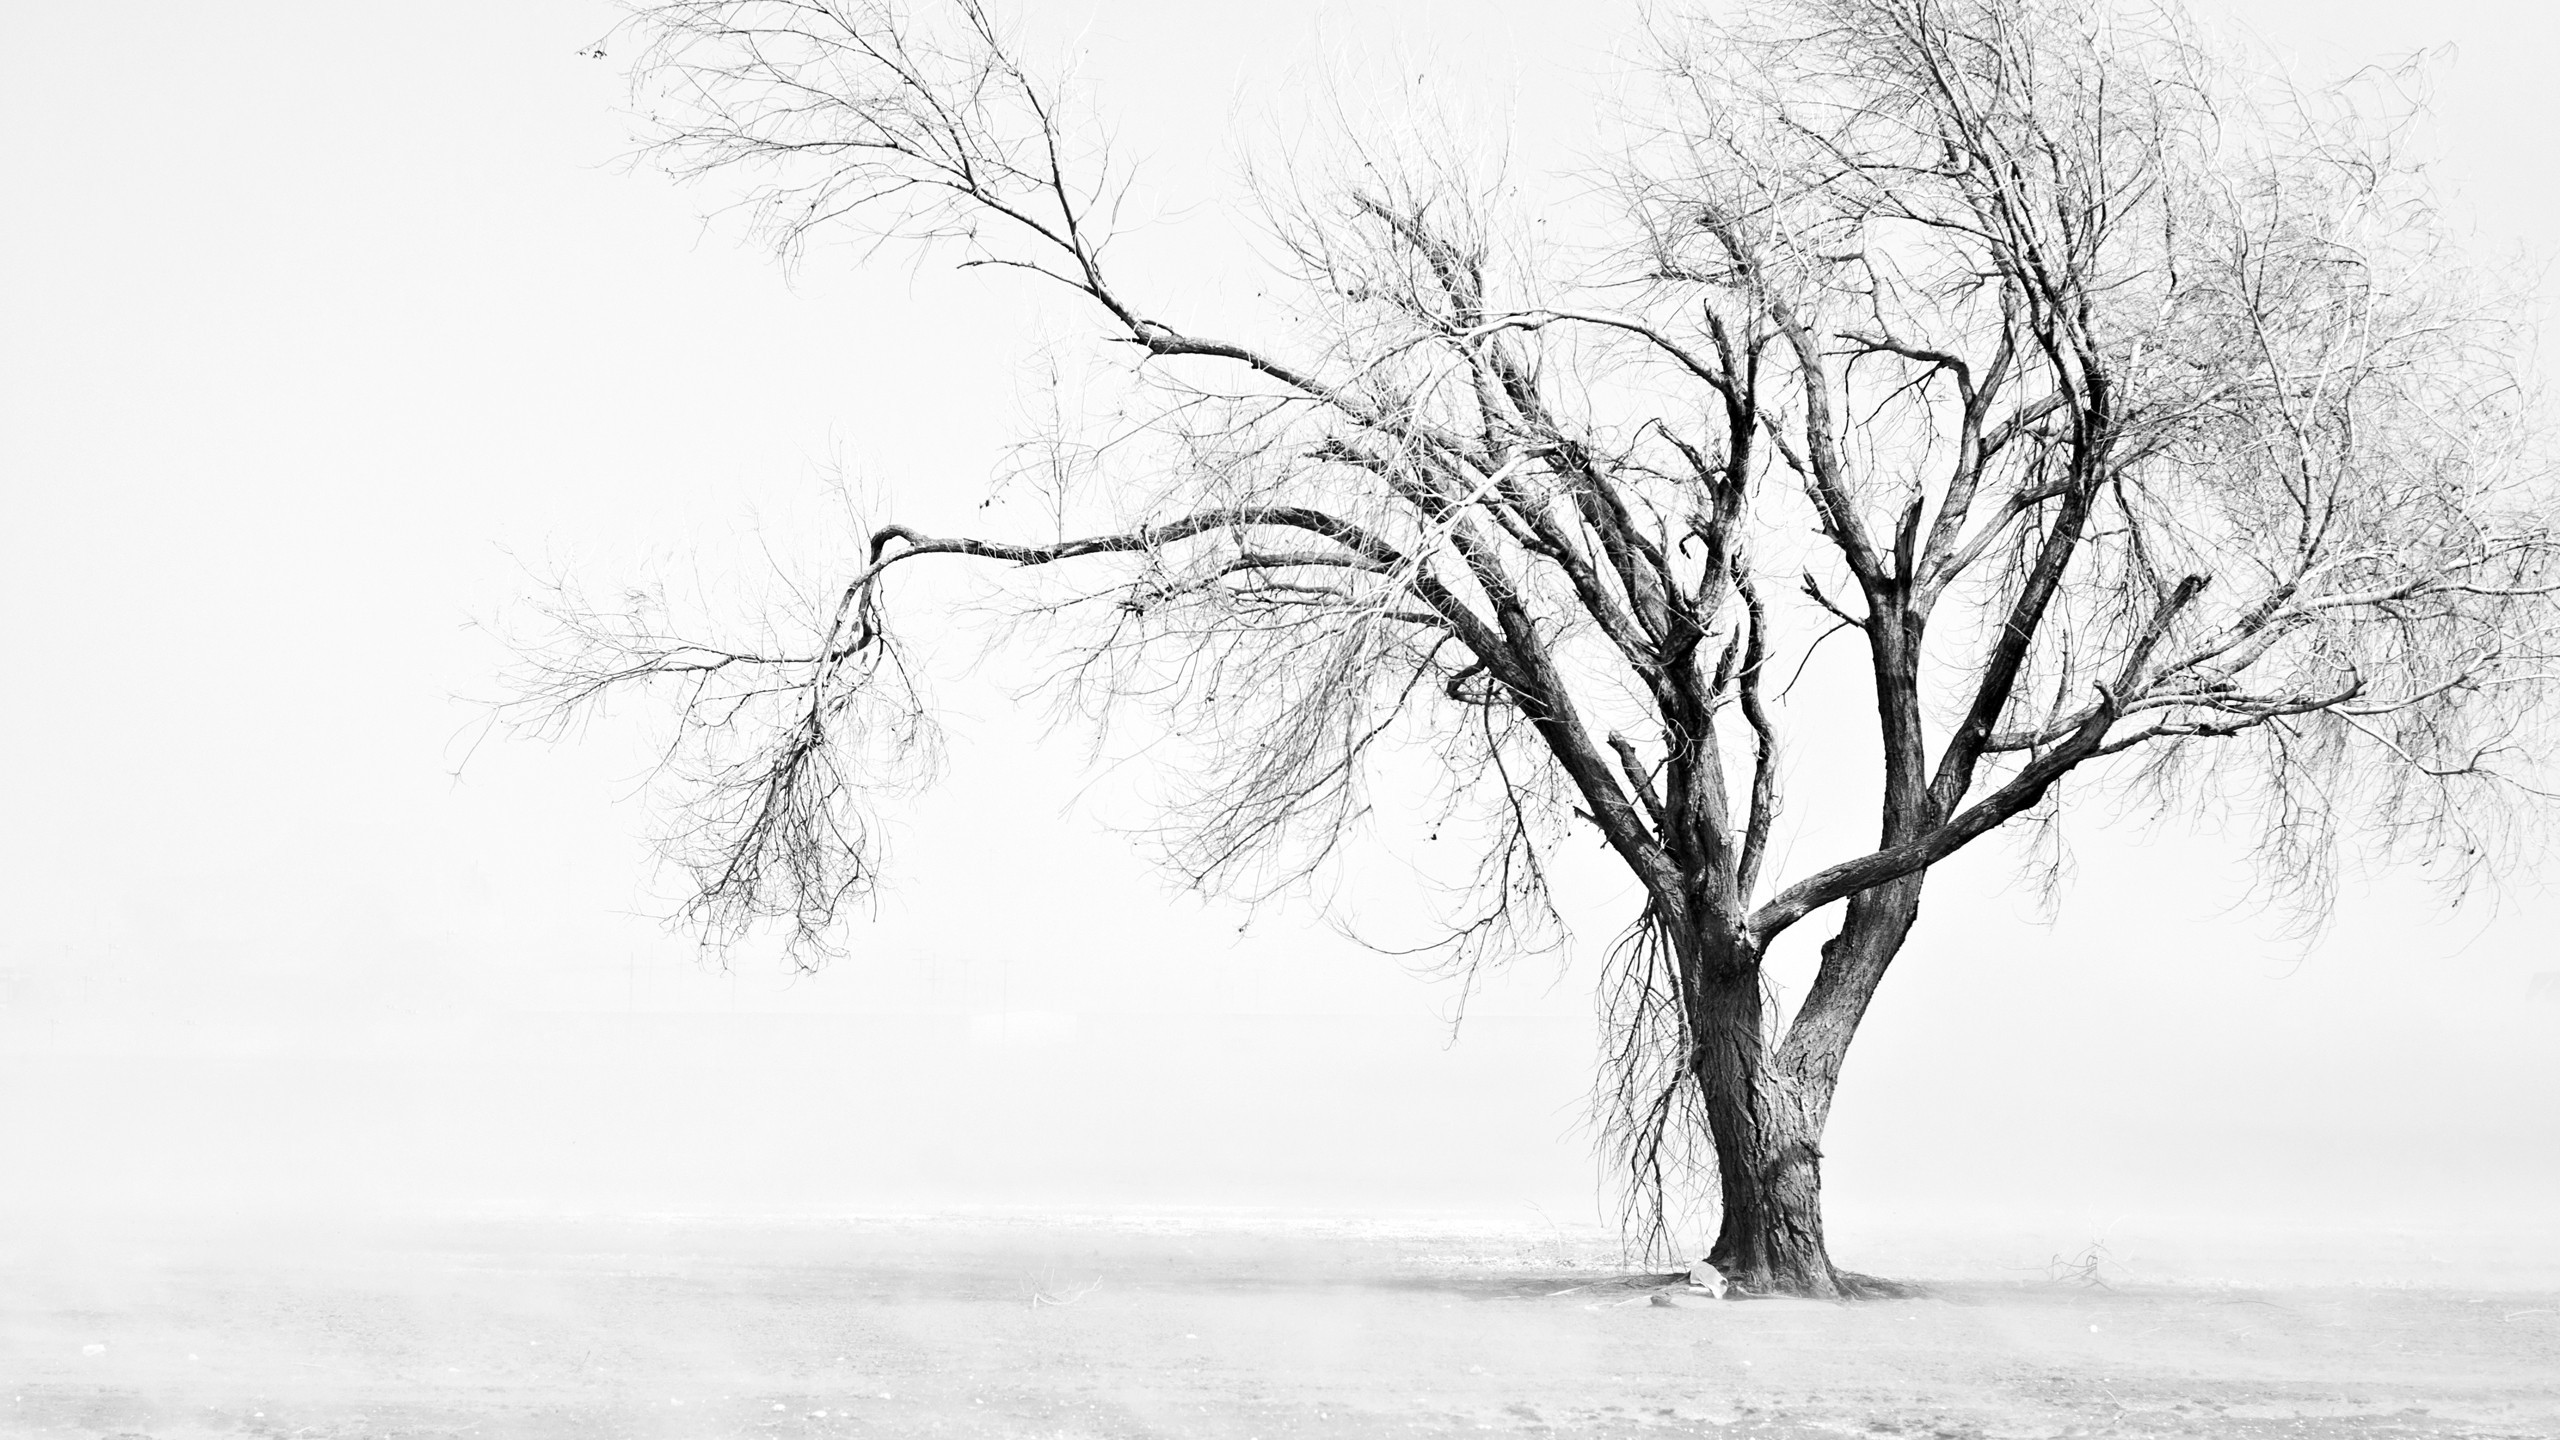 General 2560x1440 photography nature trees branch winter outdoors plants monochrome